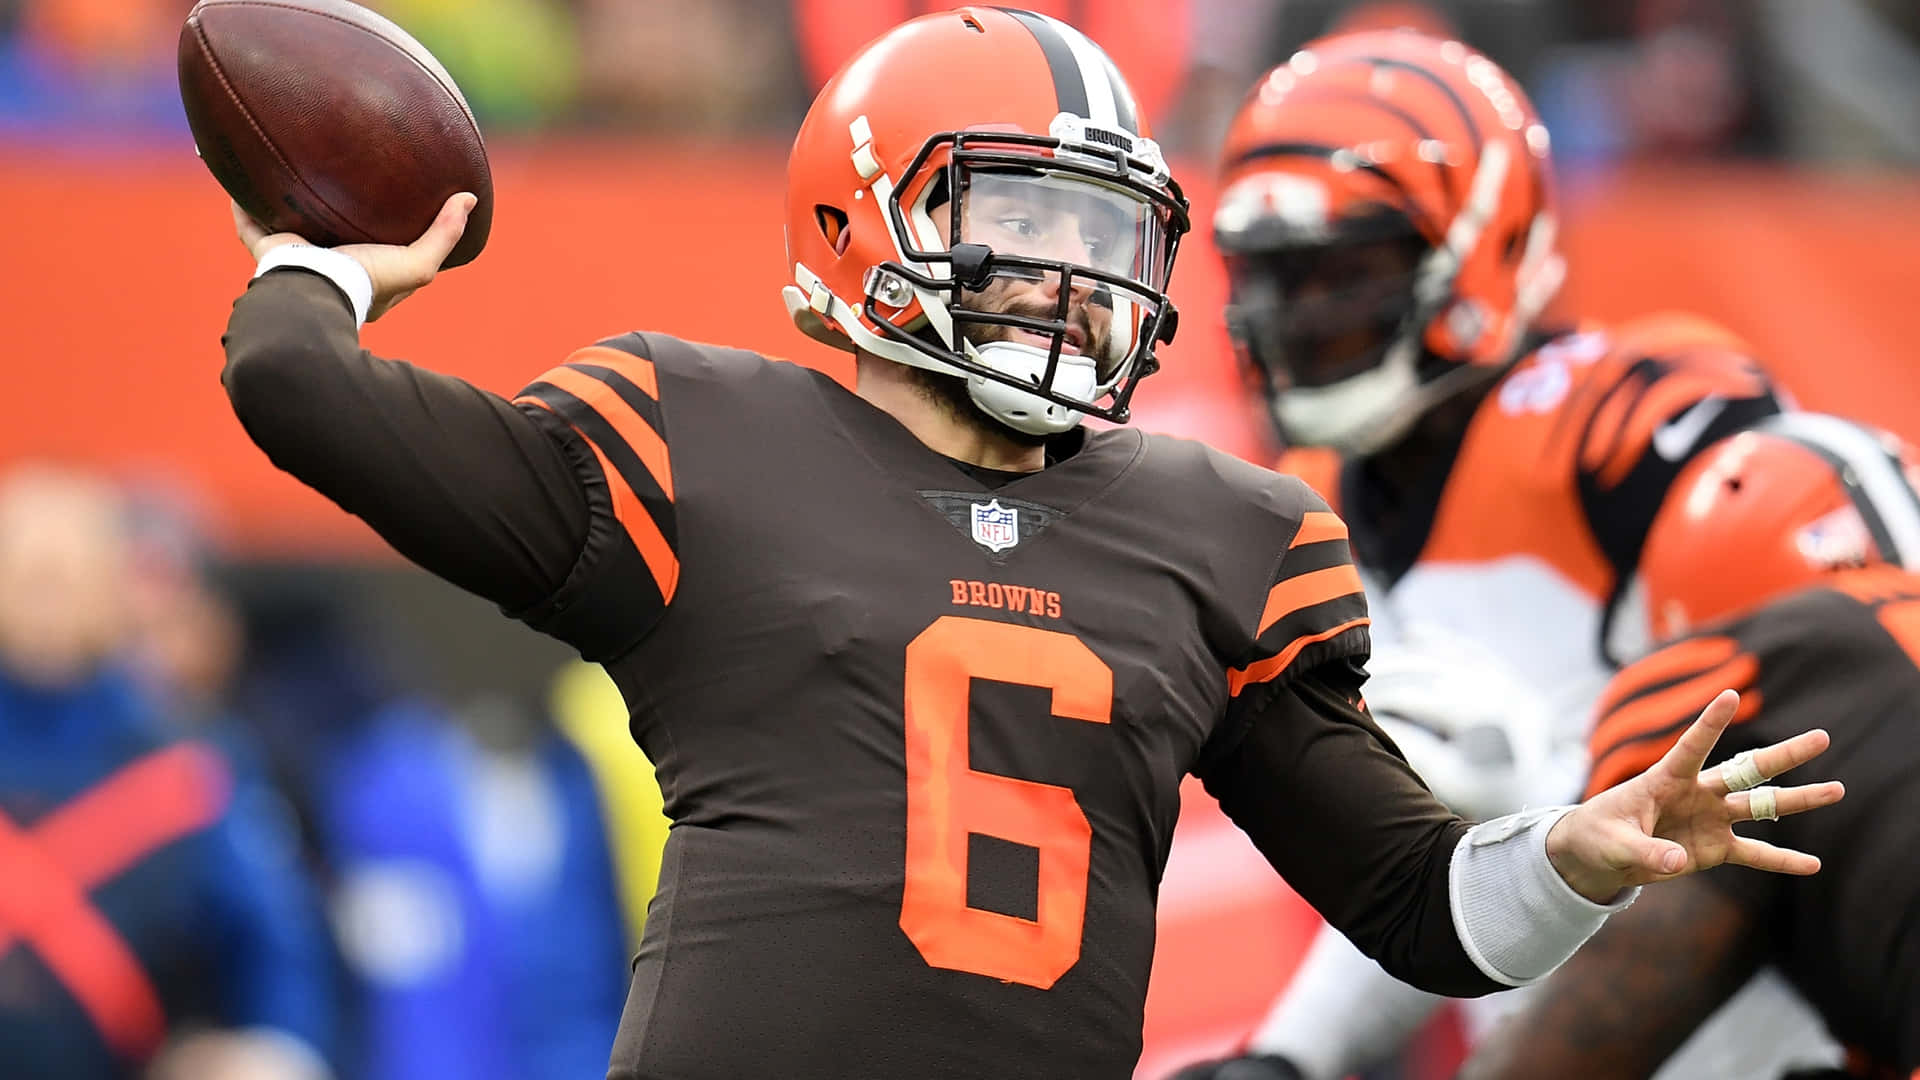 Baker Mayfield, quarterback for the Cleveland Browns leading the team to success Wallpaper